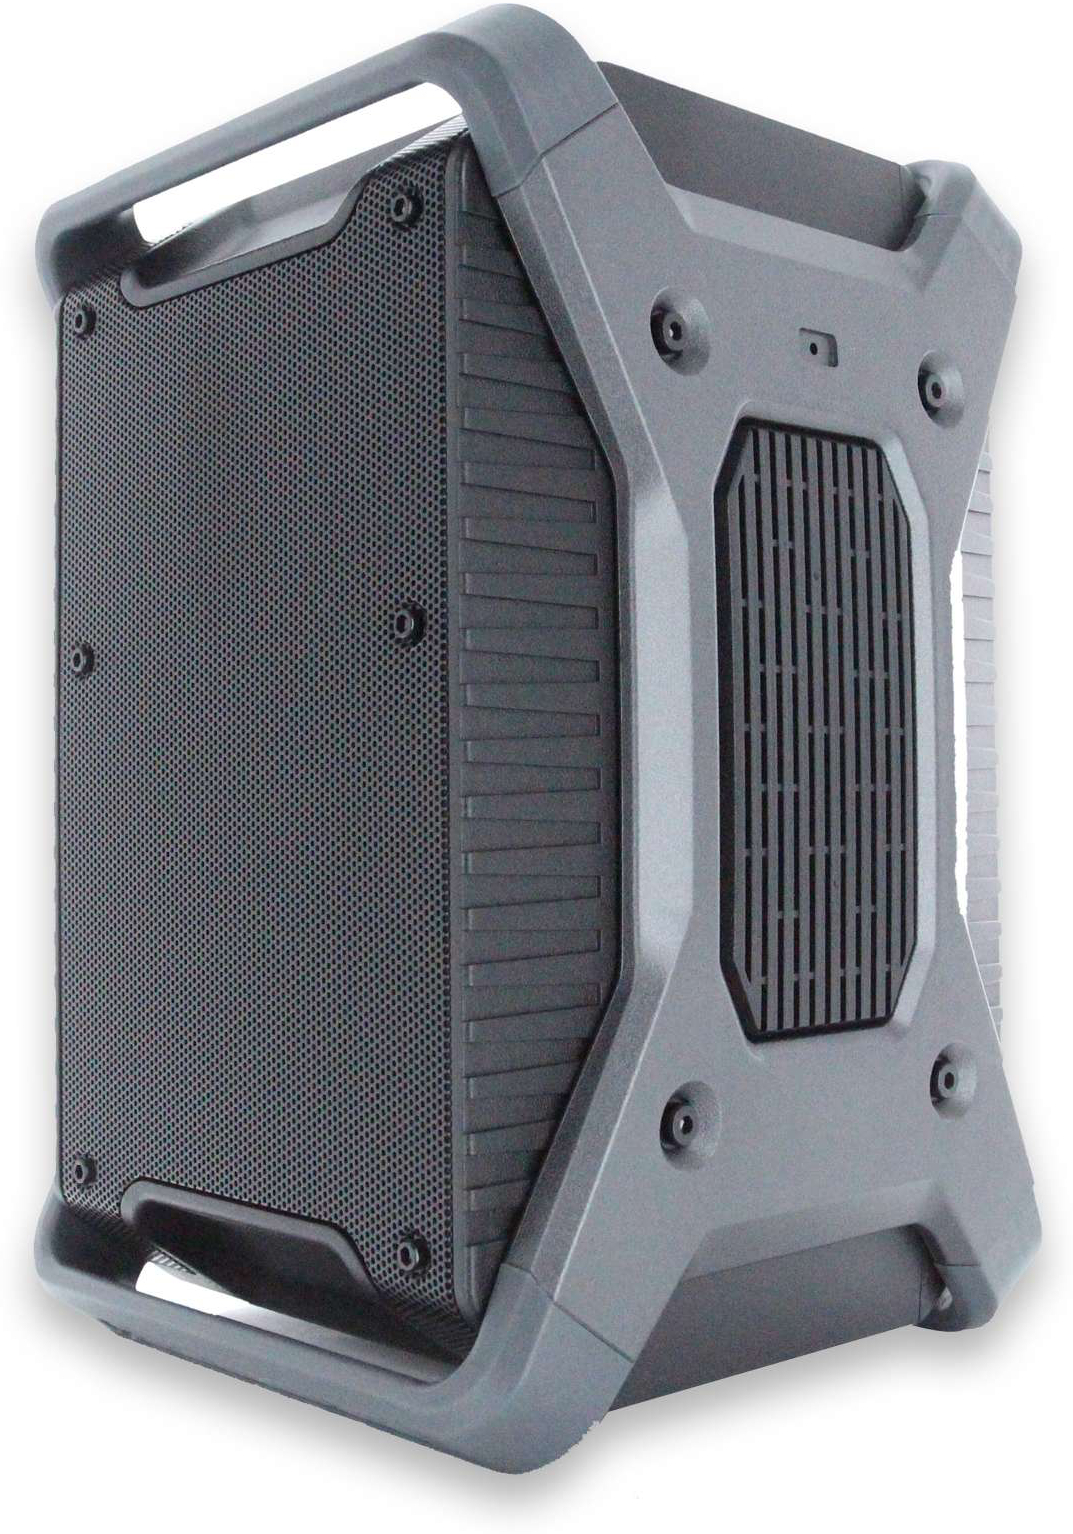 Definitive Audio Easyrider V2 - Portable PA system - Main picture